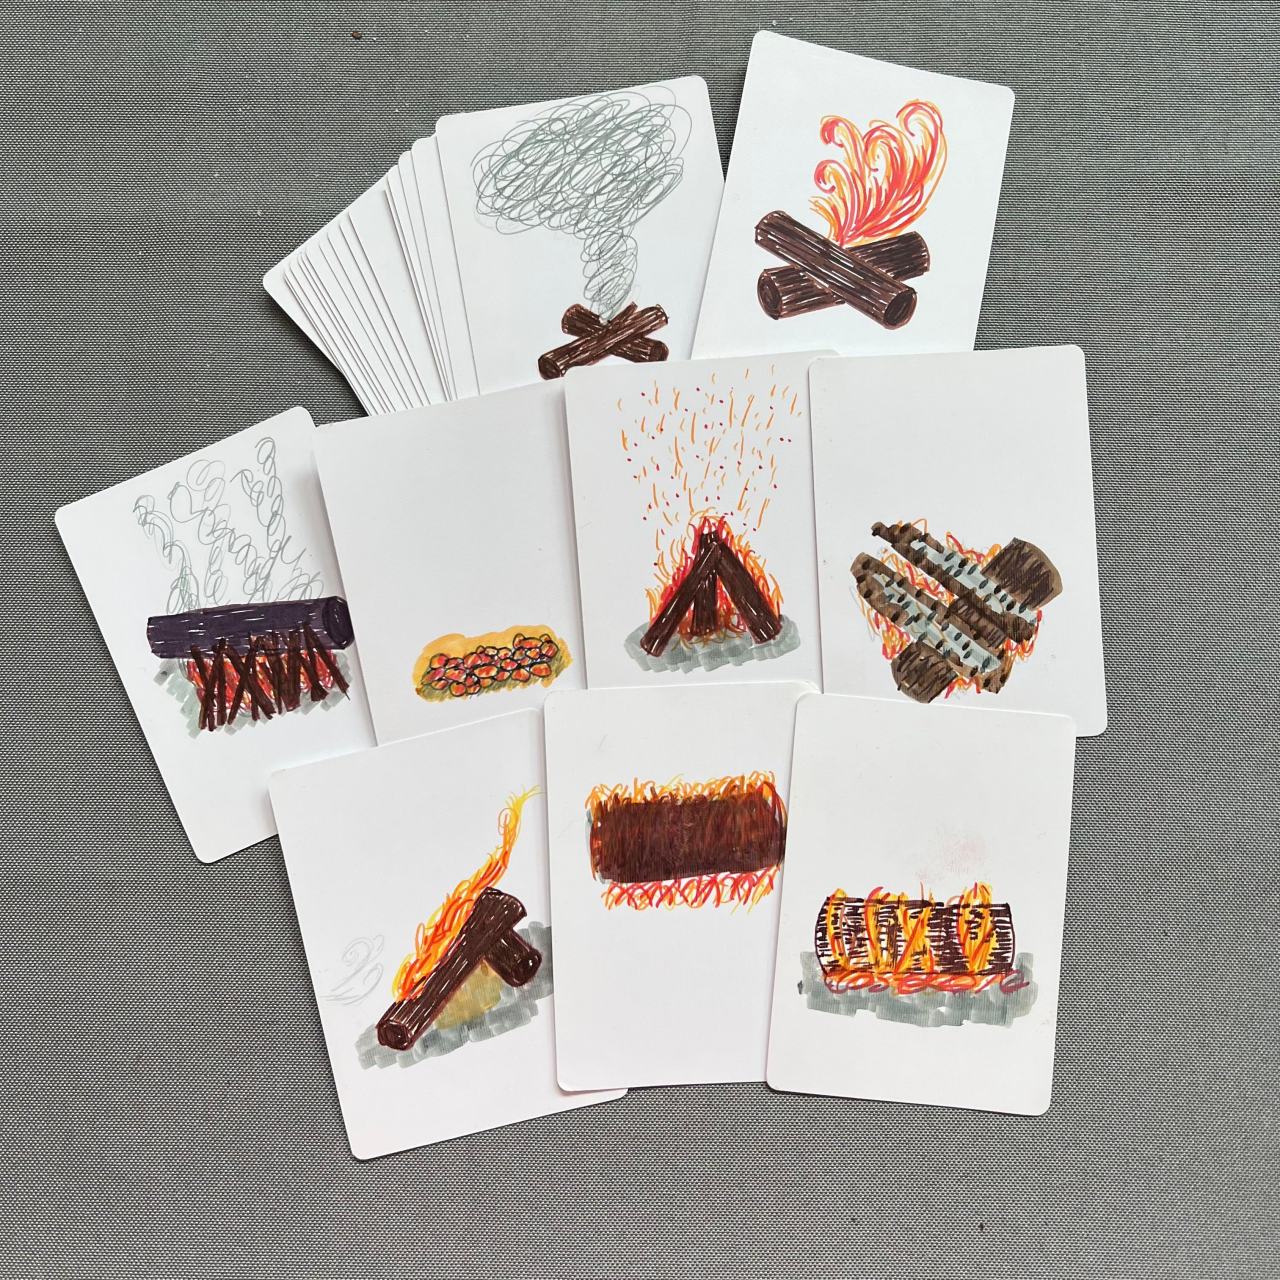 A deck of hand-drawn cards with various aspects of fires on them